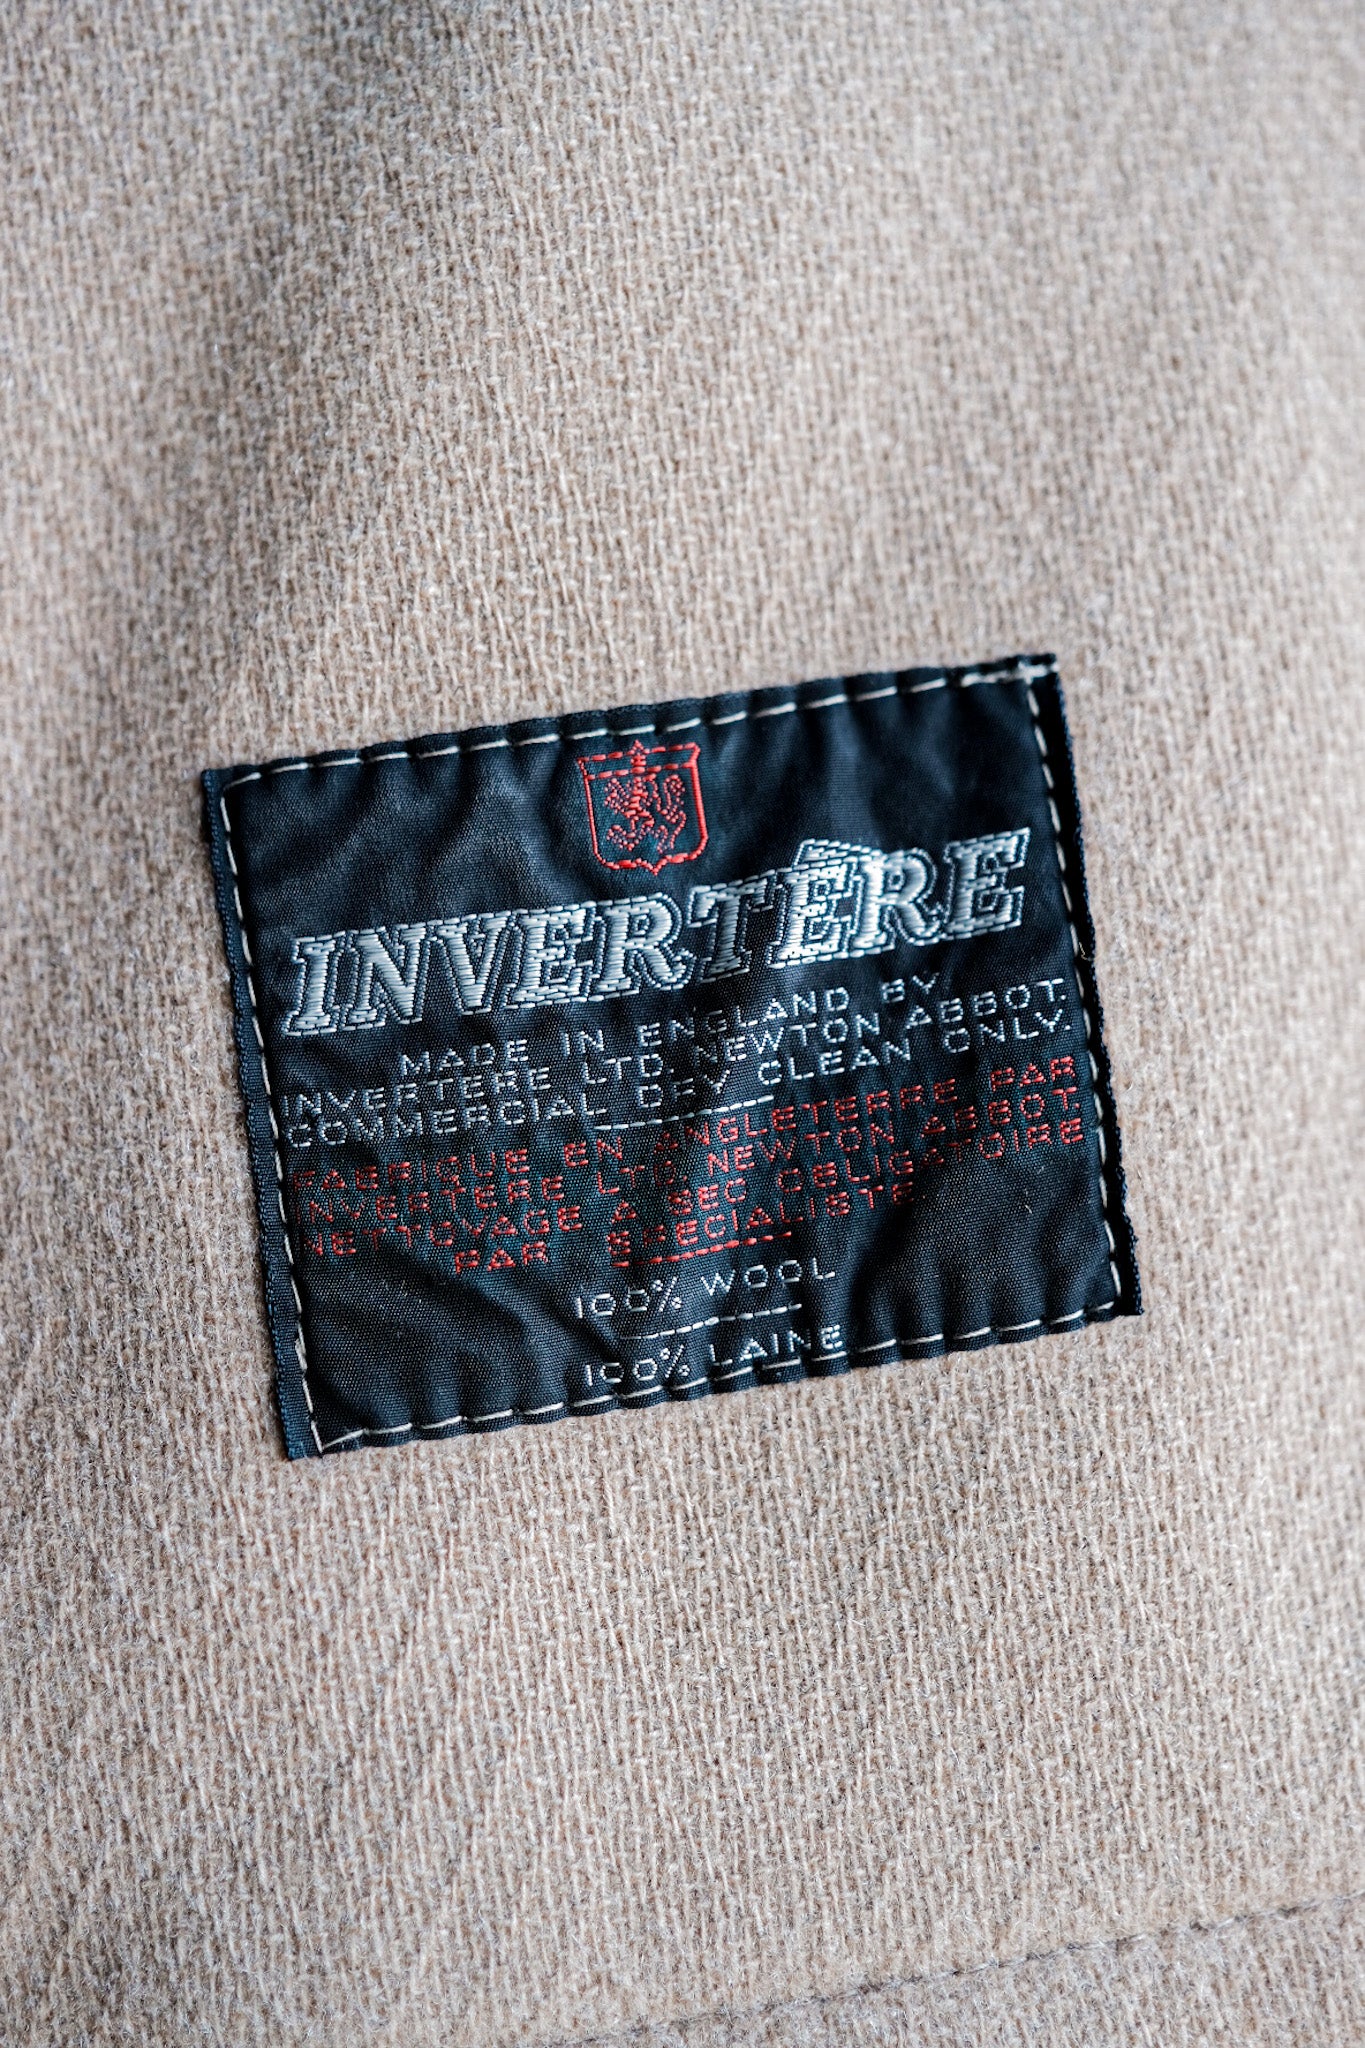 [~ 80's] OLD ENGLAND WOOL DUFFLE COAT MADE BY INVERTERE "MOORBROOK"